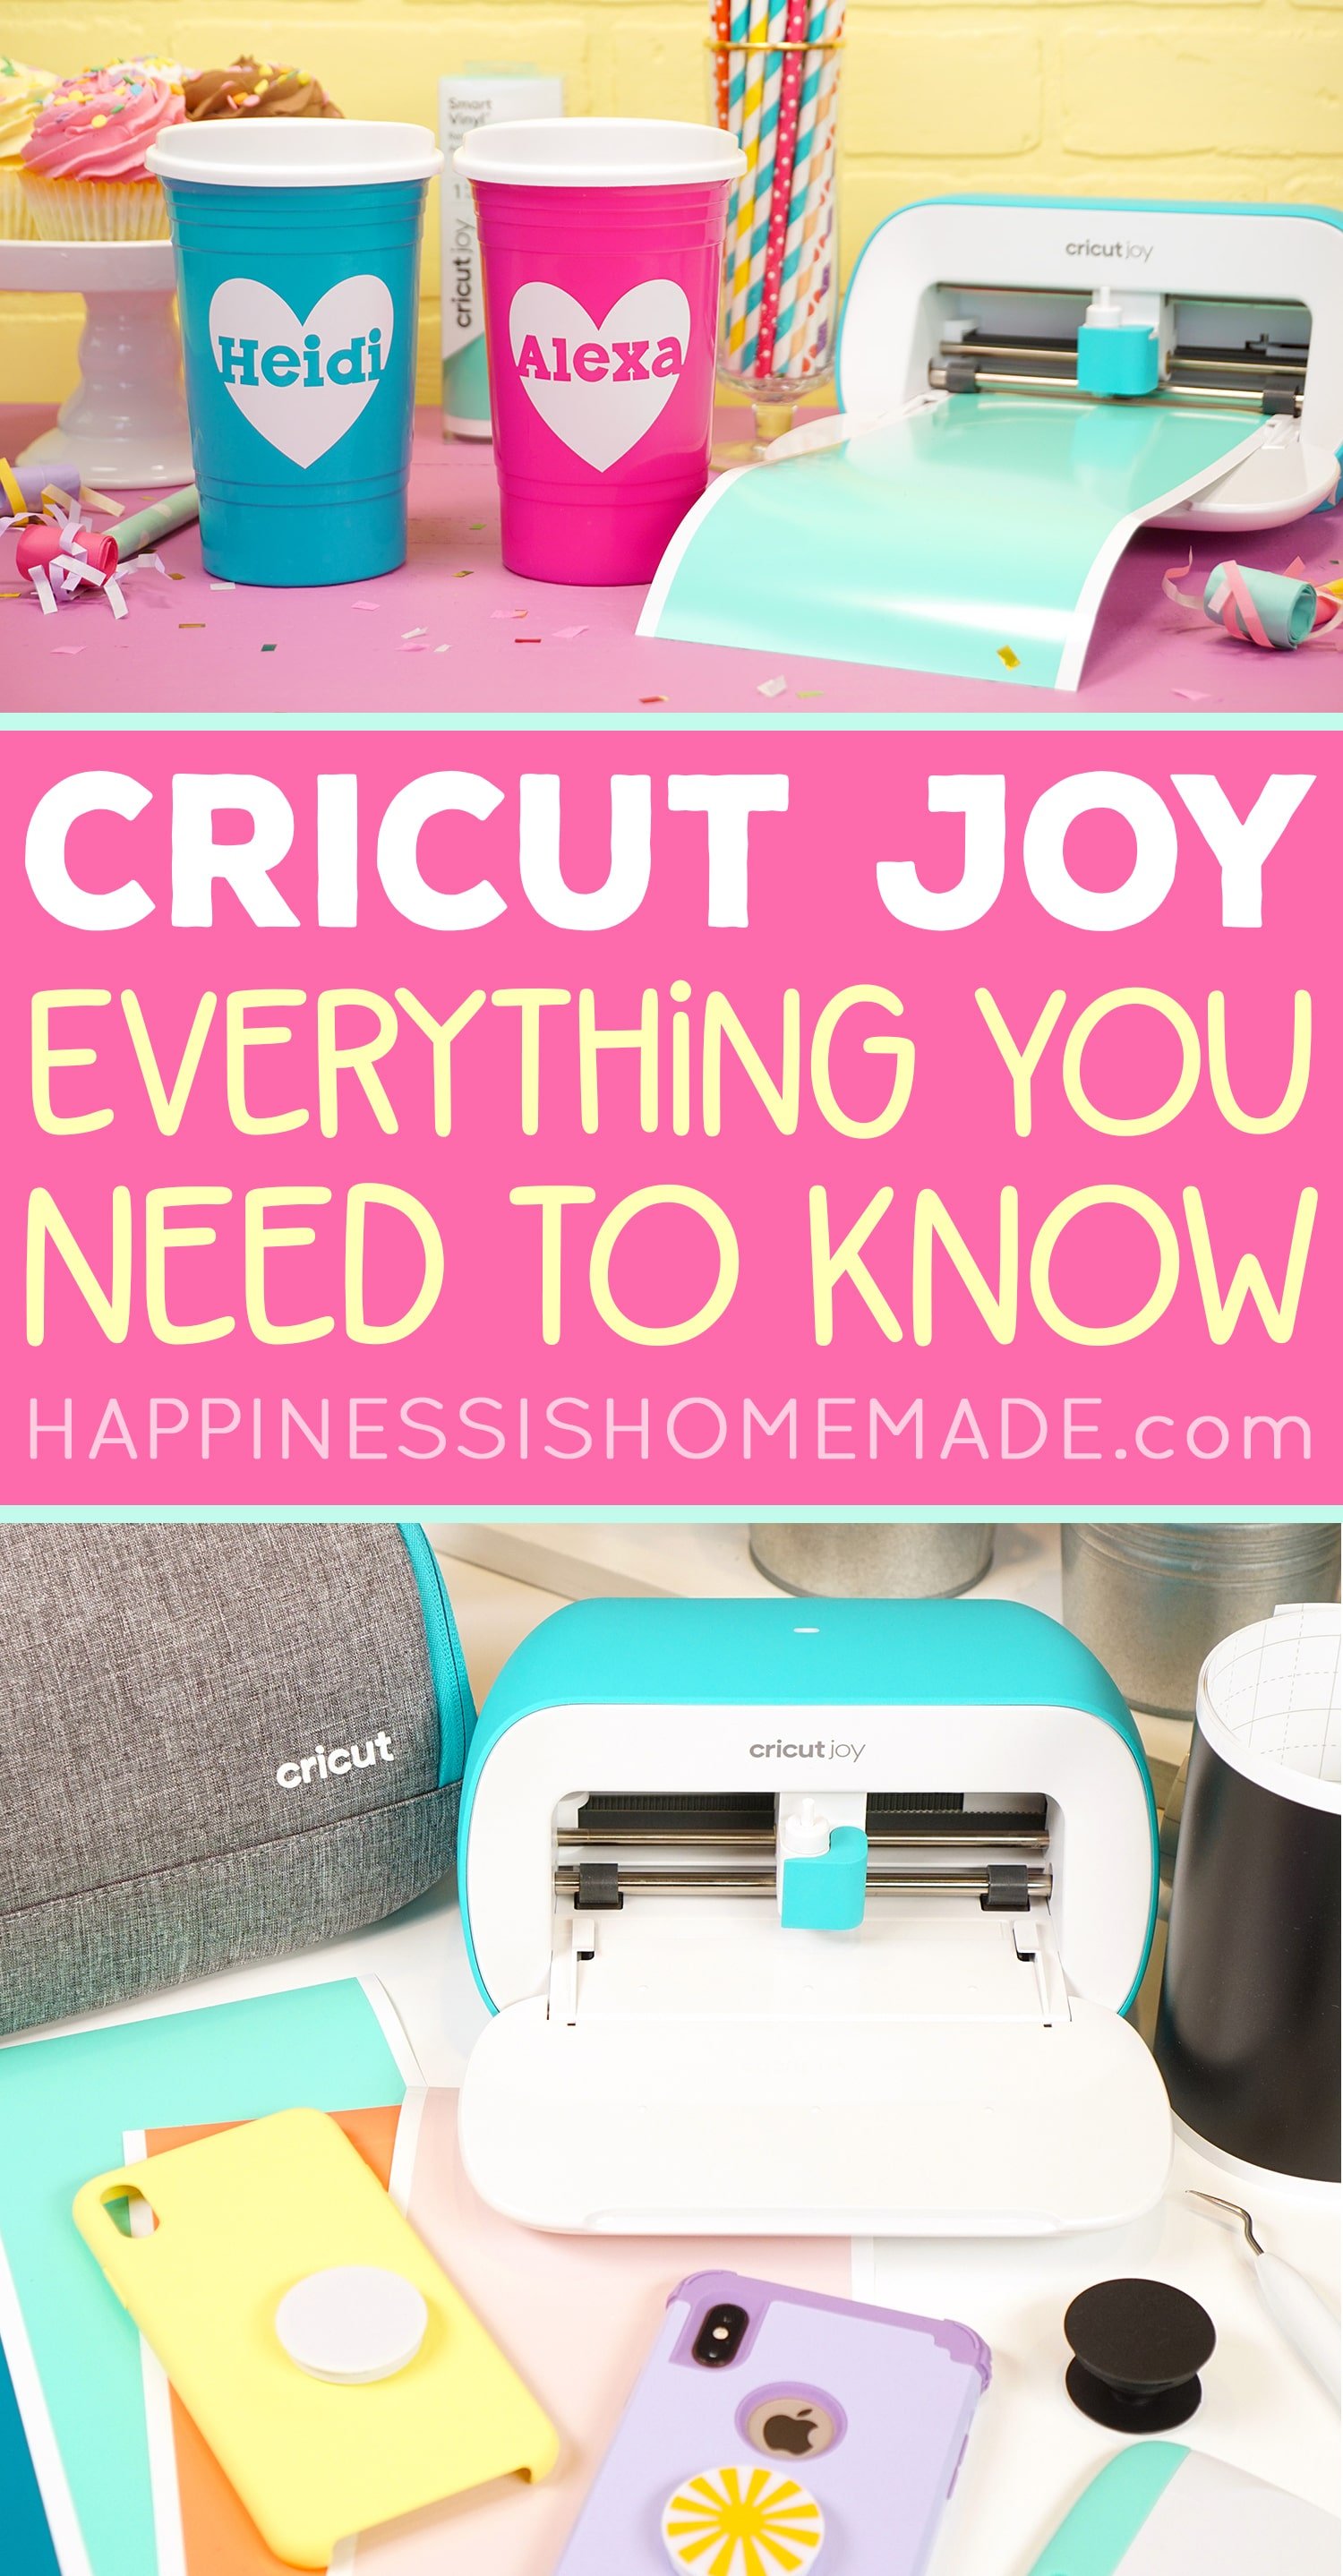 cricut joy everything you need to know